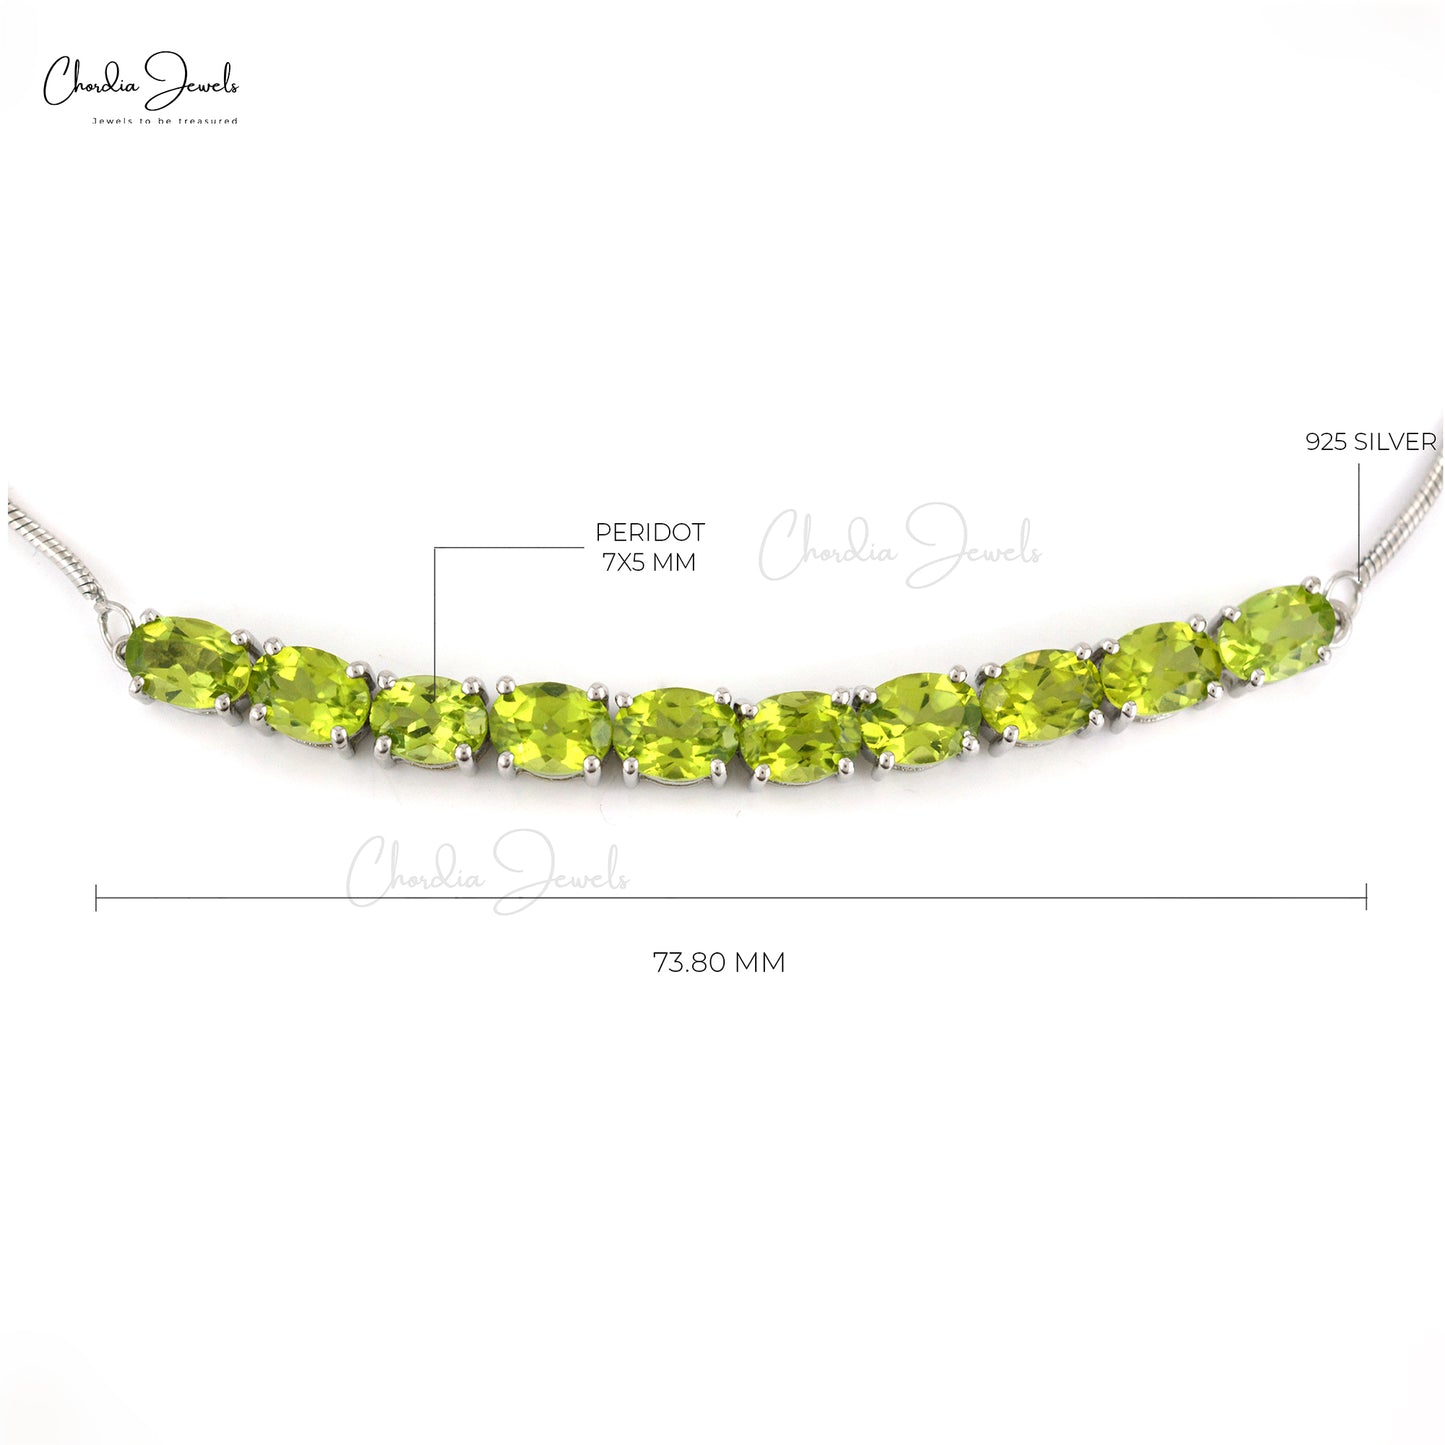 Top Manufacturer Authentic Peridot Bracelet 925 Sterling Oval Cut Gemstone Sliver Jewelry August Birthstone Jewelry At Offer Price